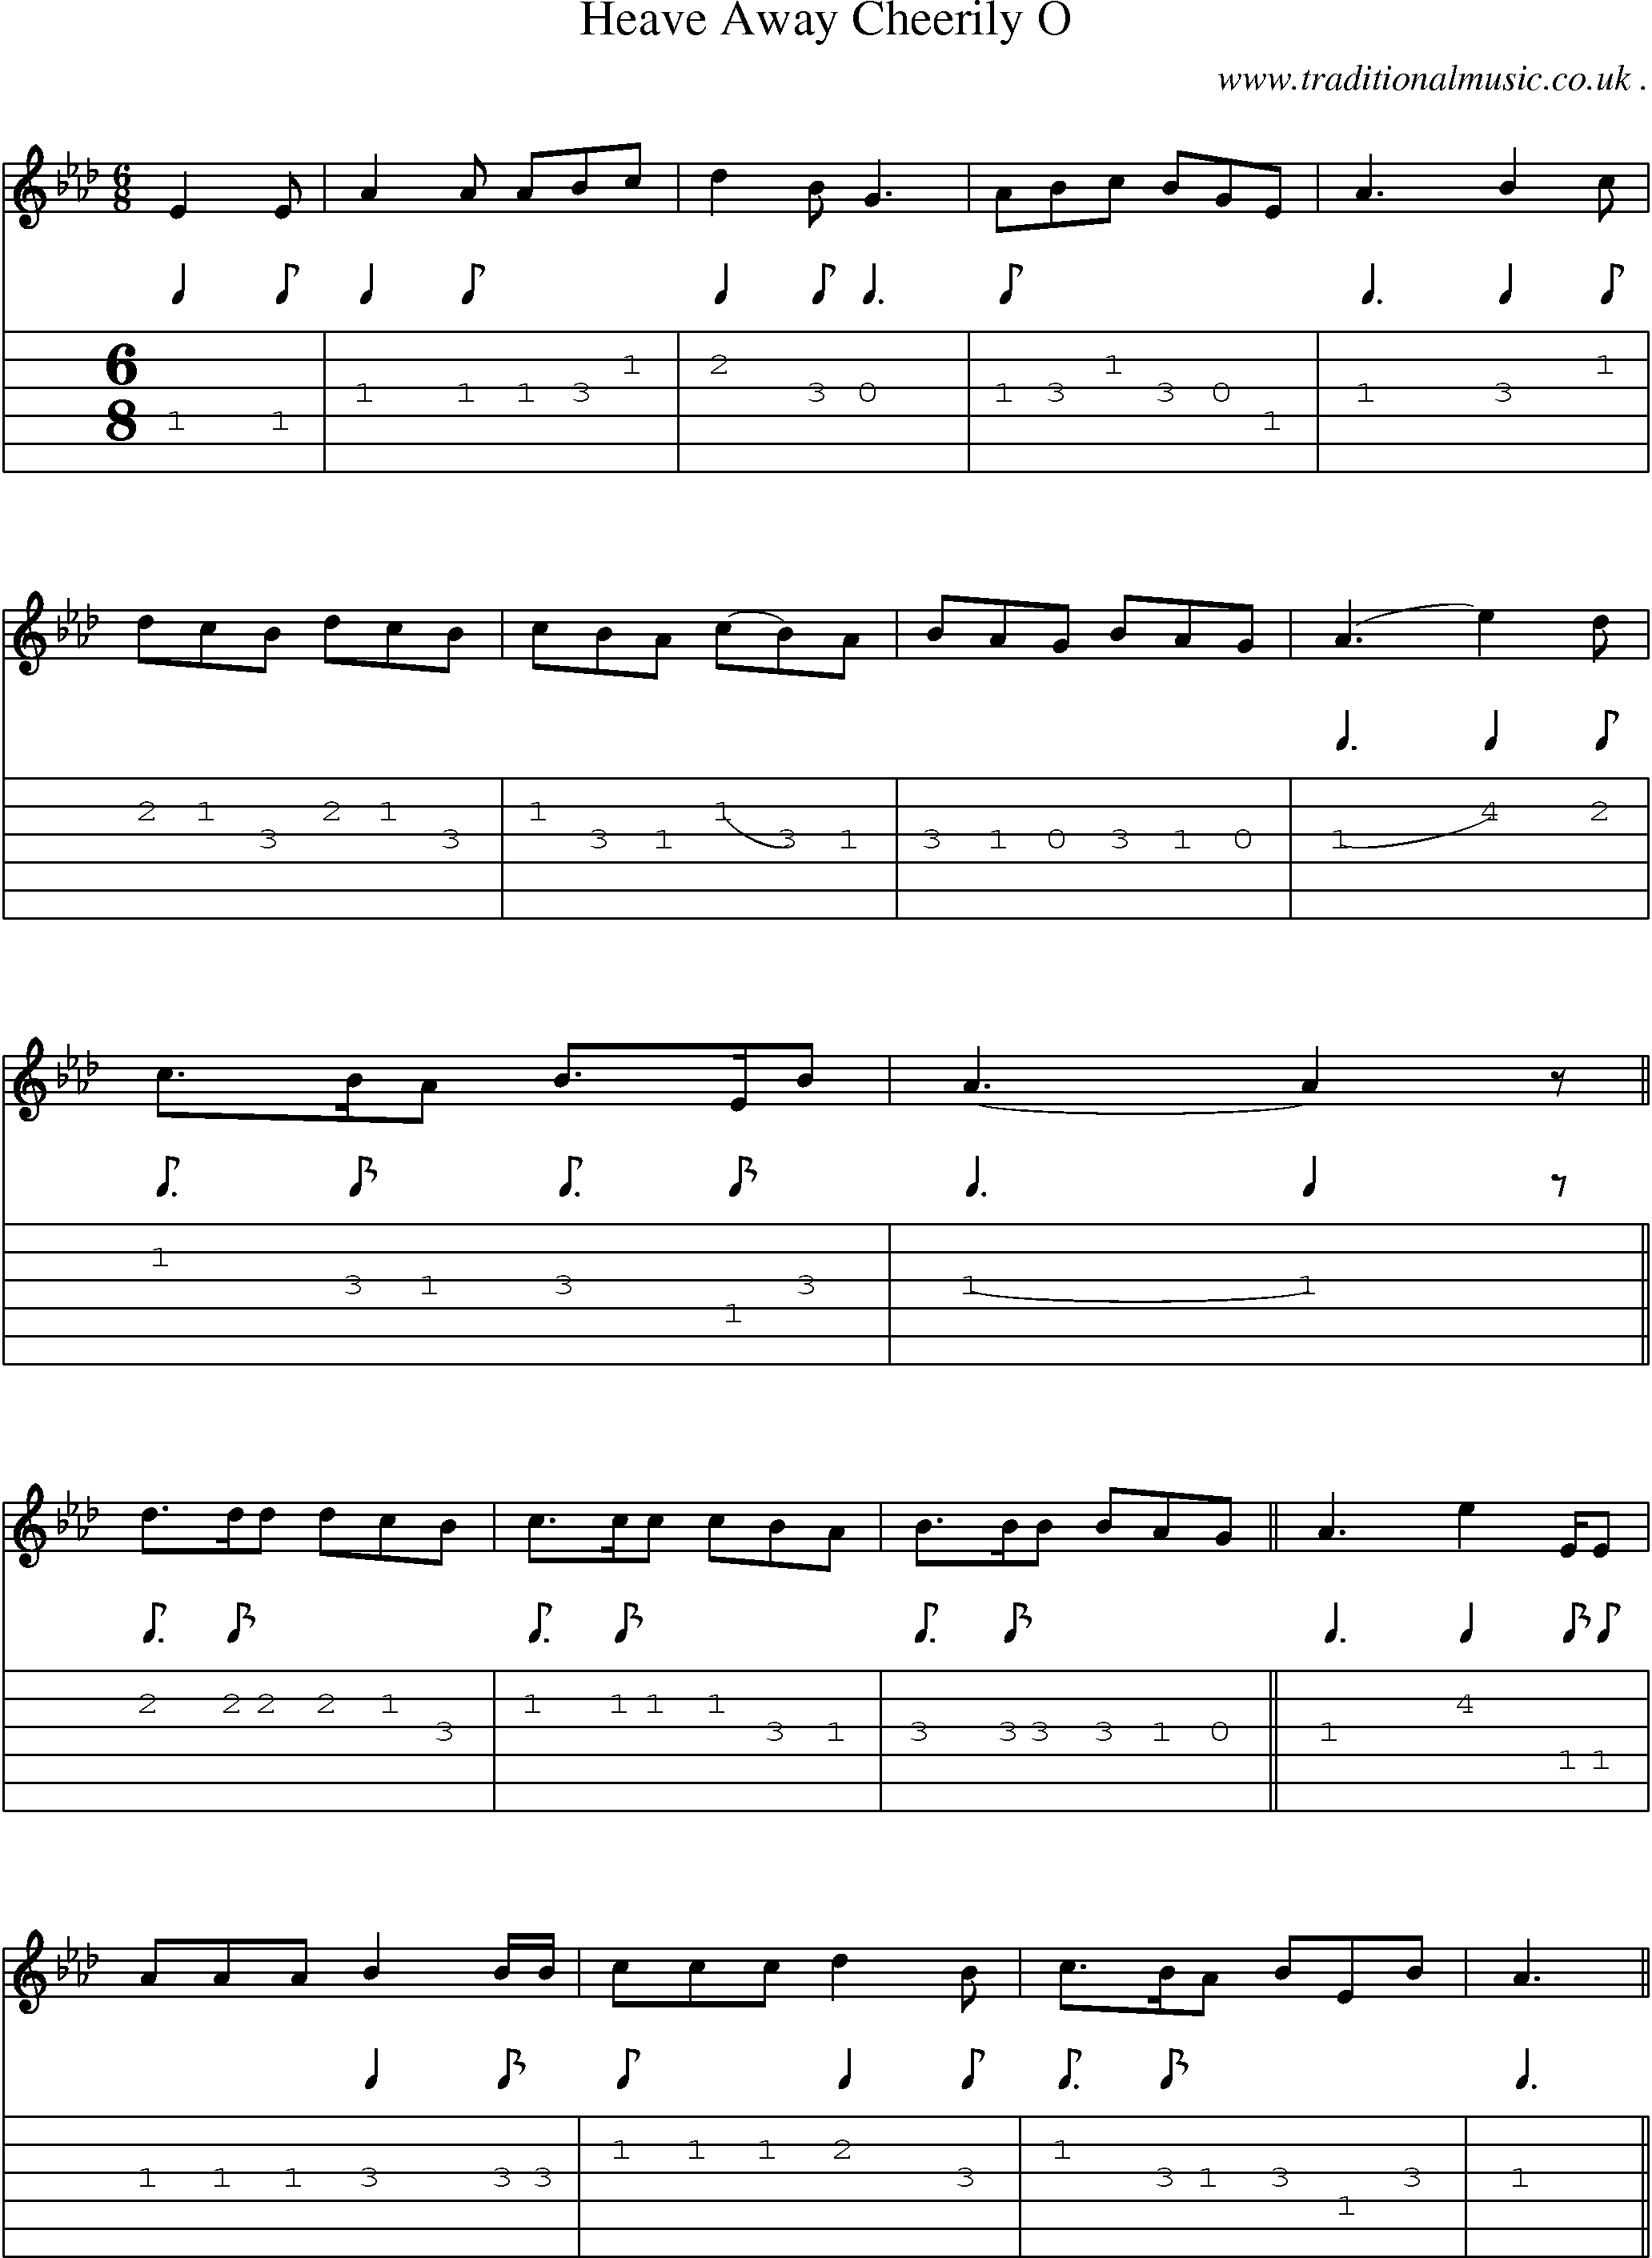 Sheet-Music and Guitar Tabs for Heave Away Cheerily O